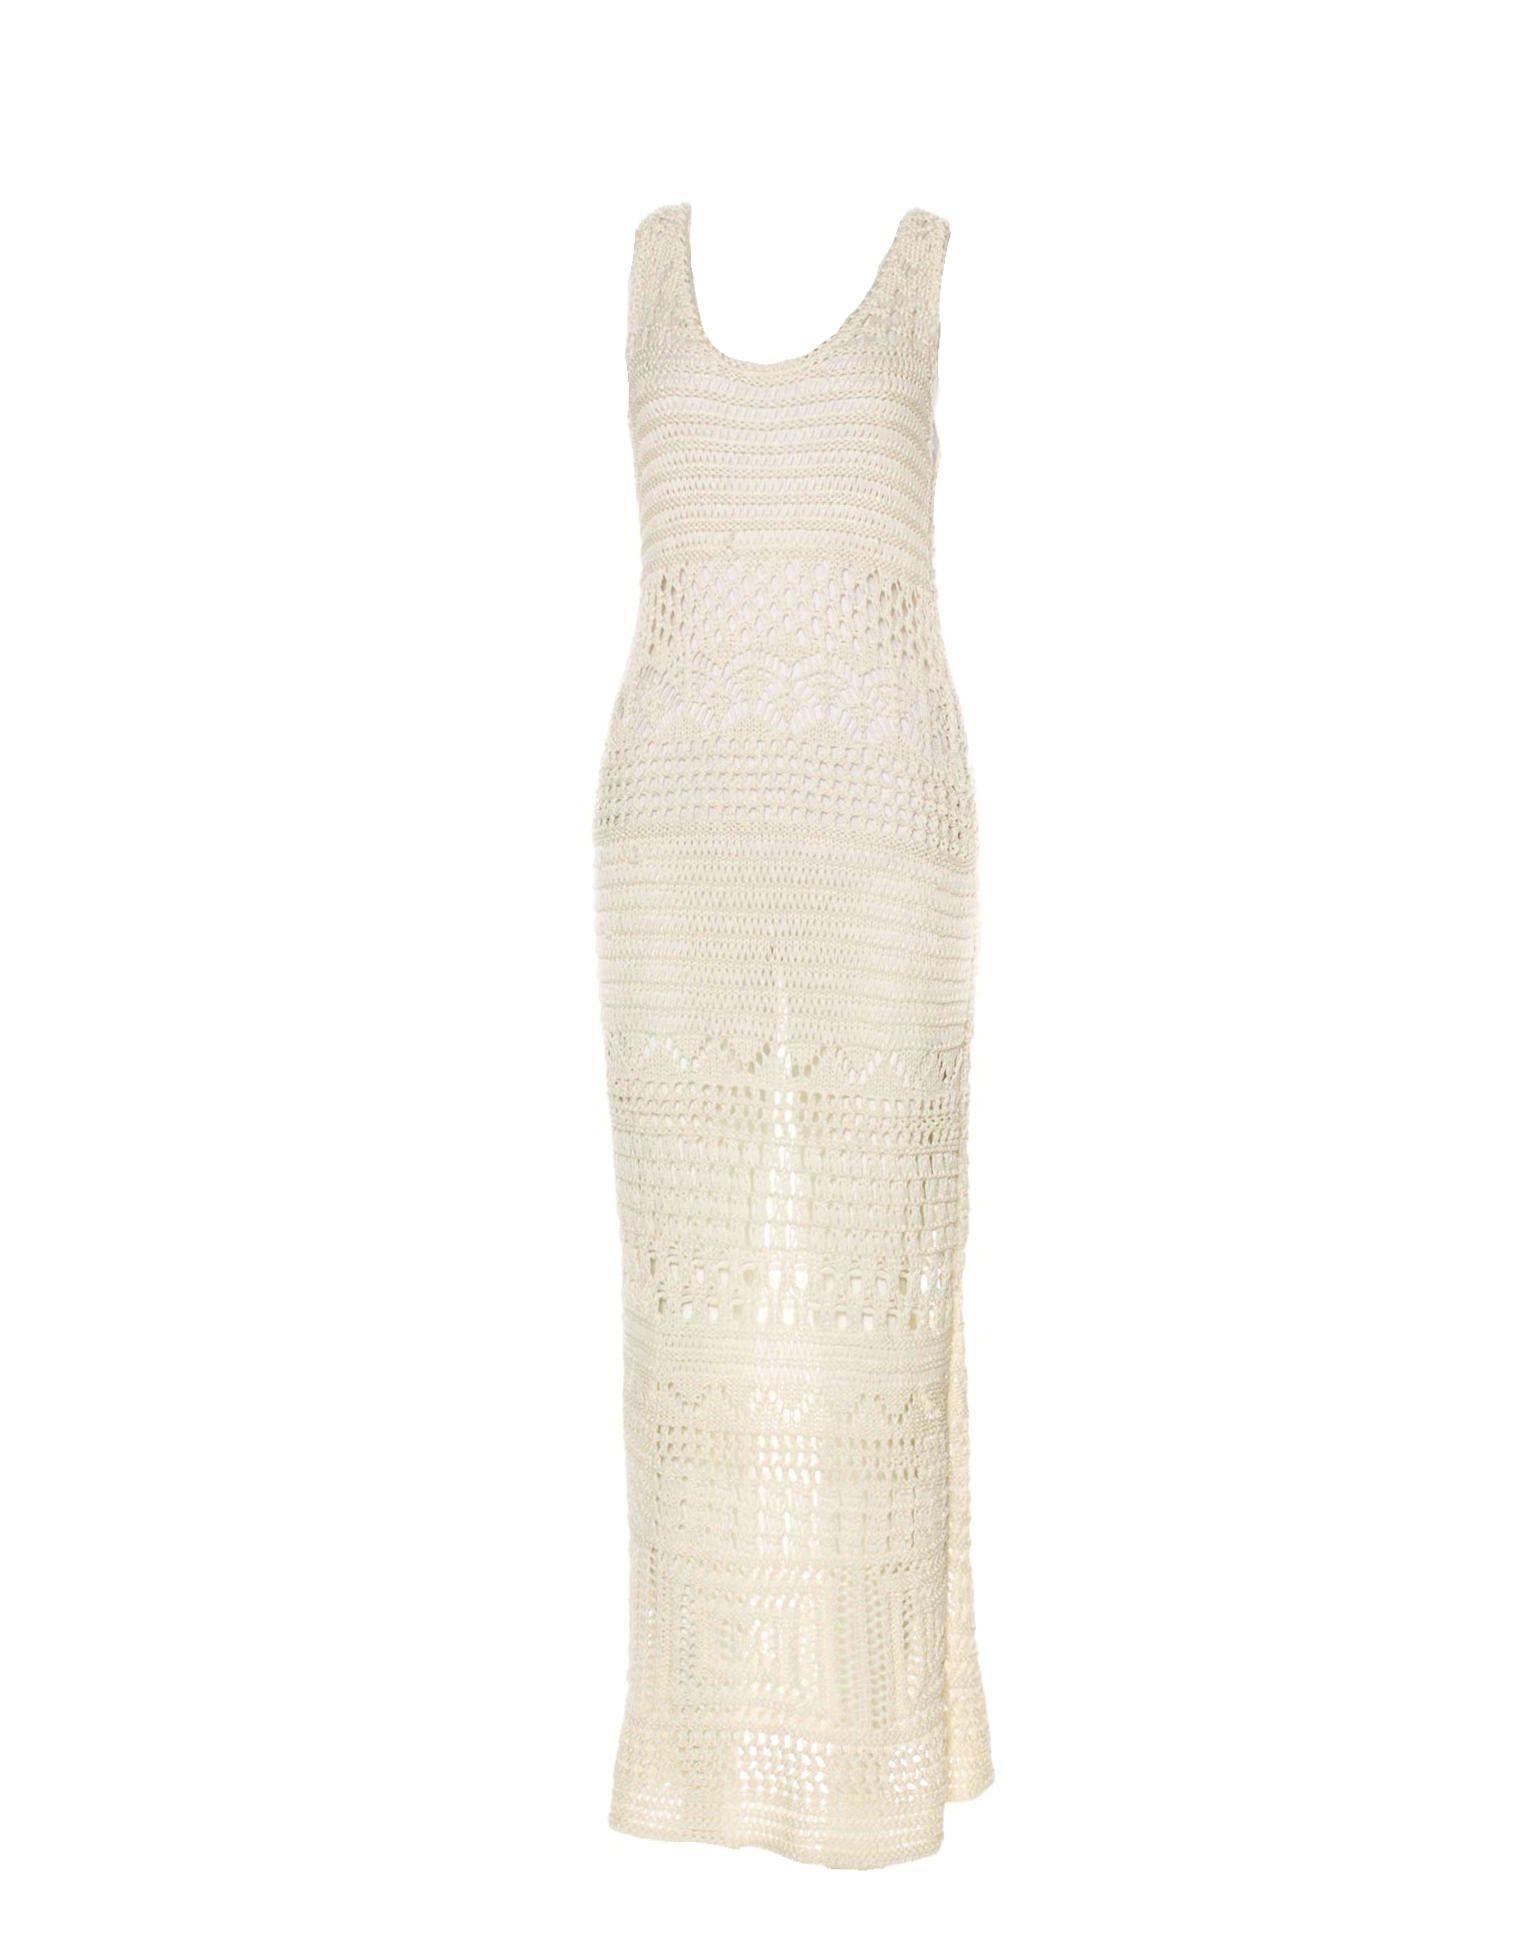 Gorgeous EMILIO PUCCI crochet knit maxi dress / gown
Perfect for the resort season
Sleeveless
Off-white crochet-knit cotton
Full length
Simply slips on
Dry clean Only
Made in Italy
See campaign picture for style reference only